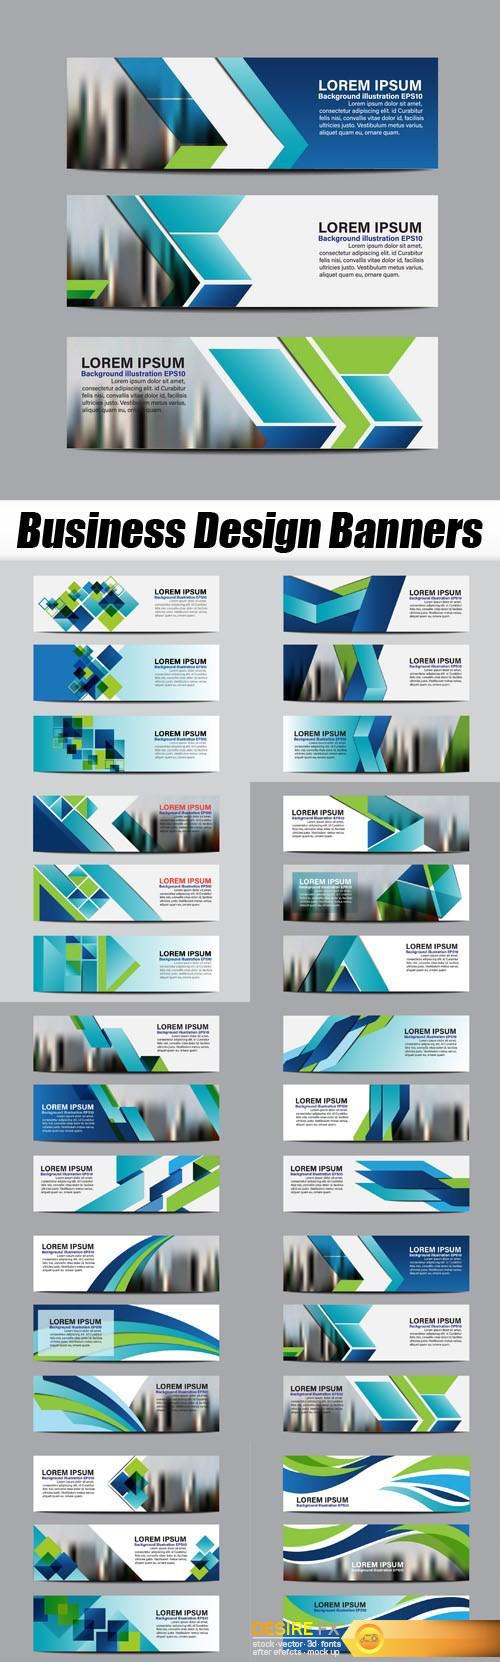 Business Design Banners - 10xEPS